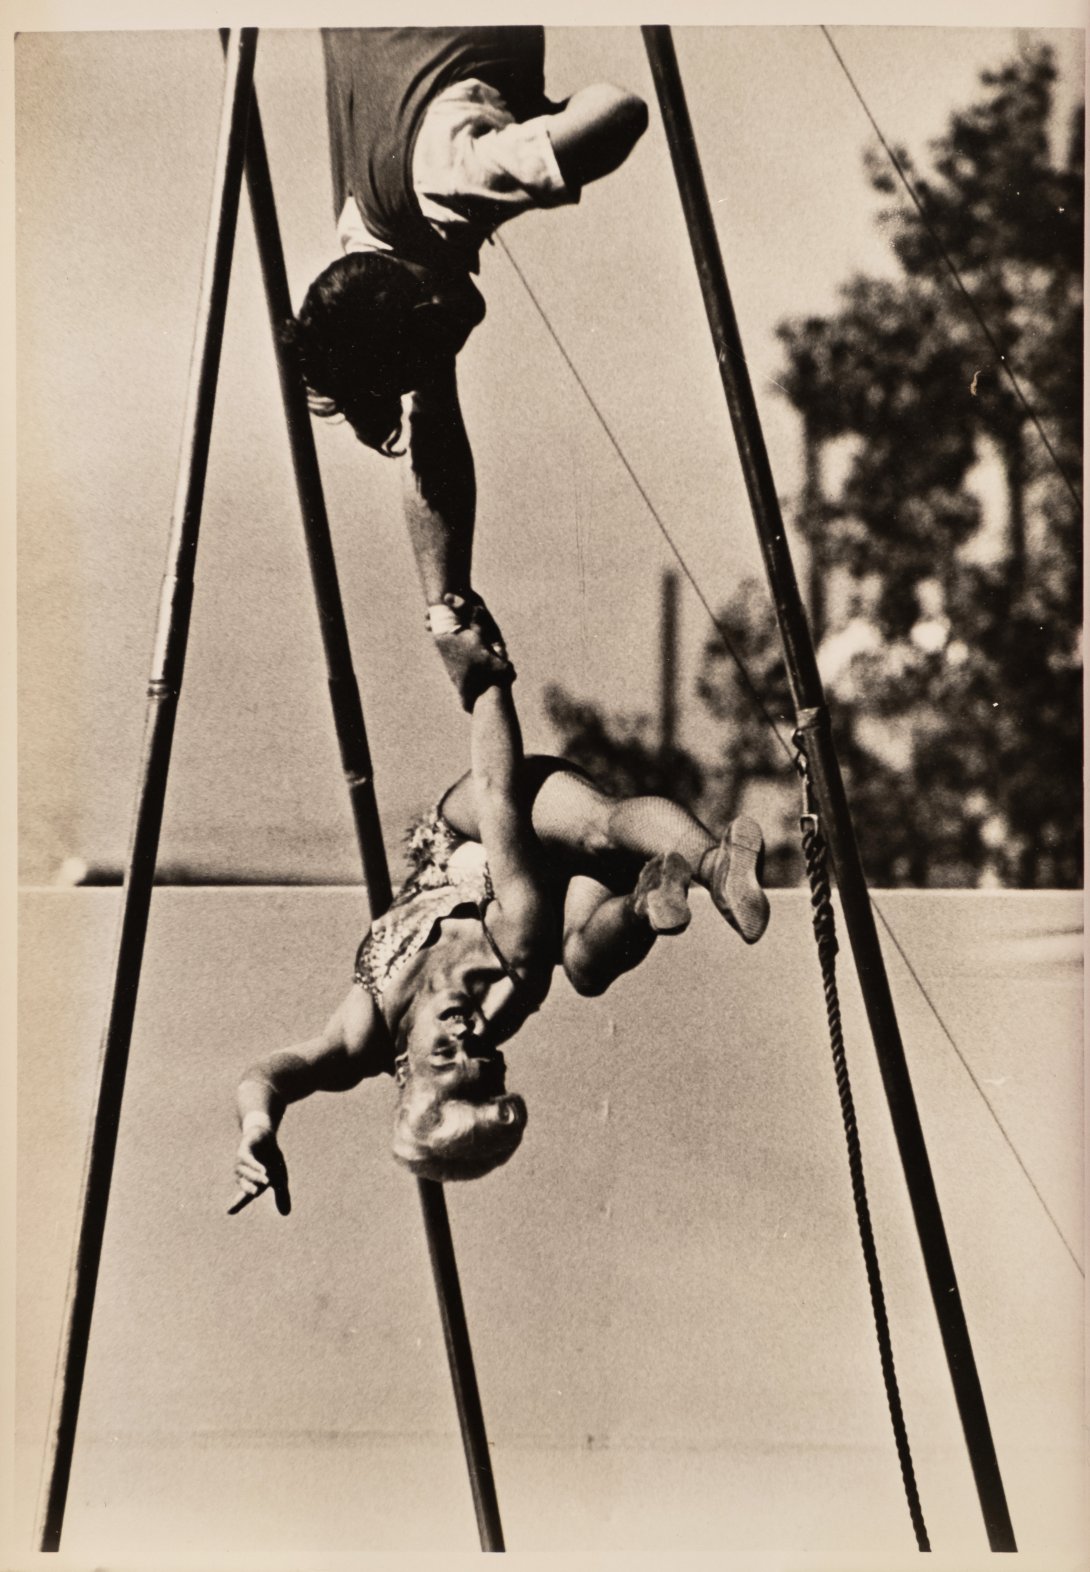 A photograph of two acrobatic entertainers performing an aerial trapeze act